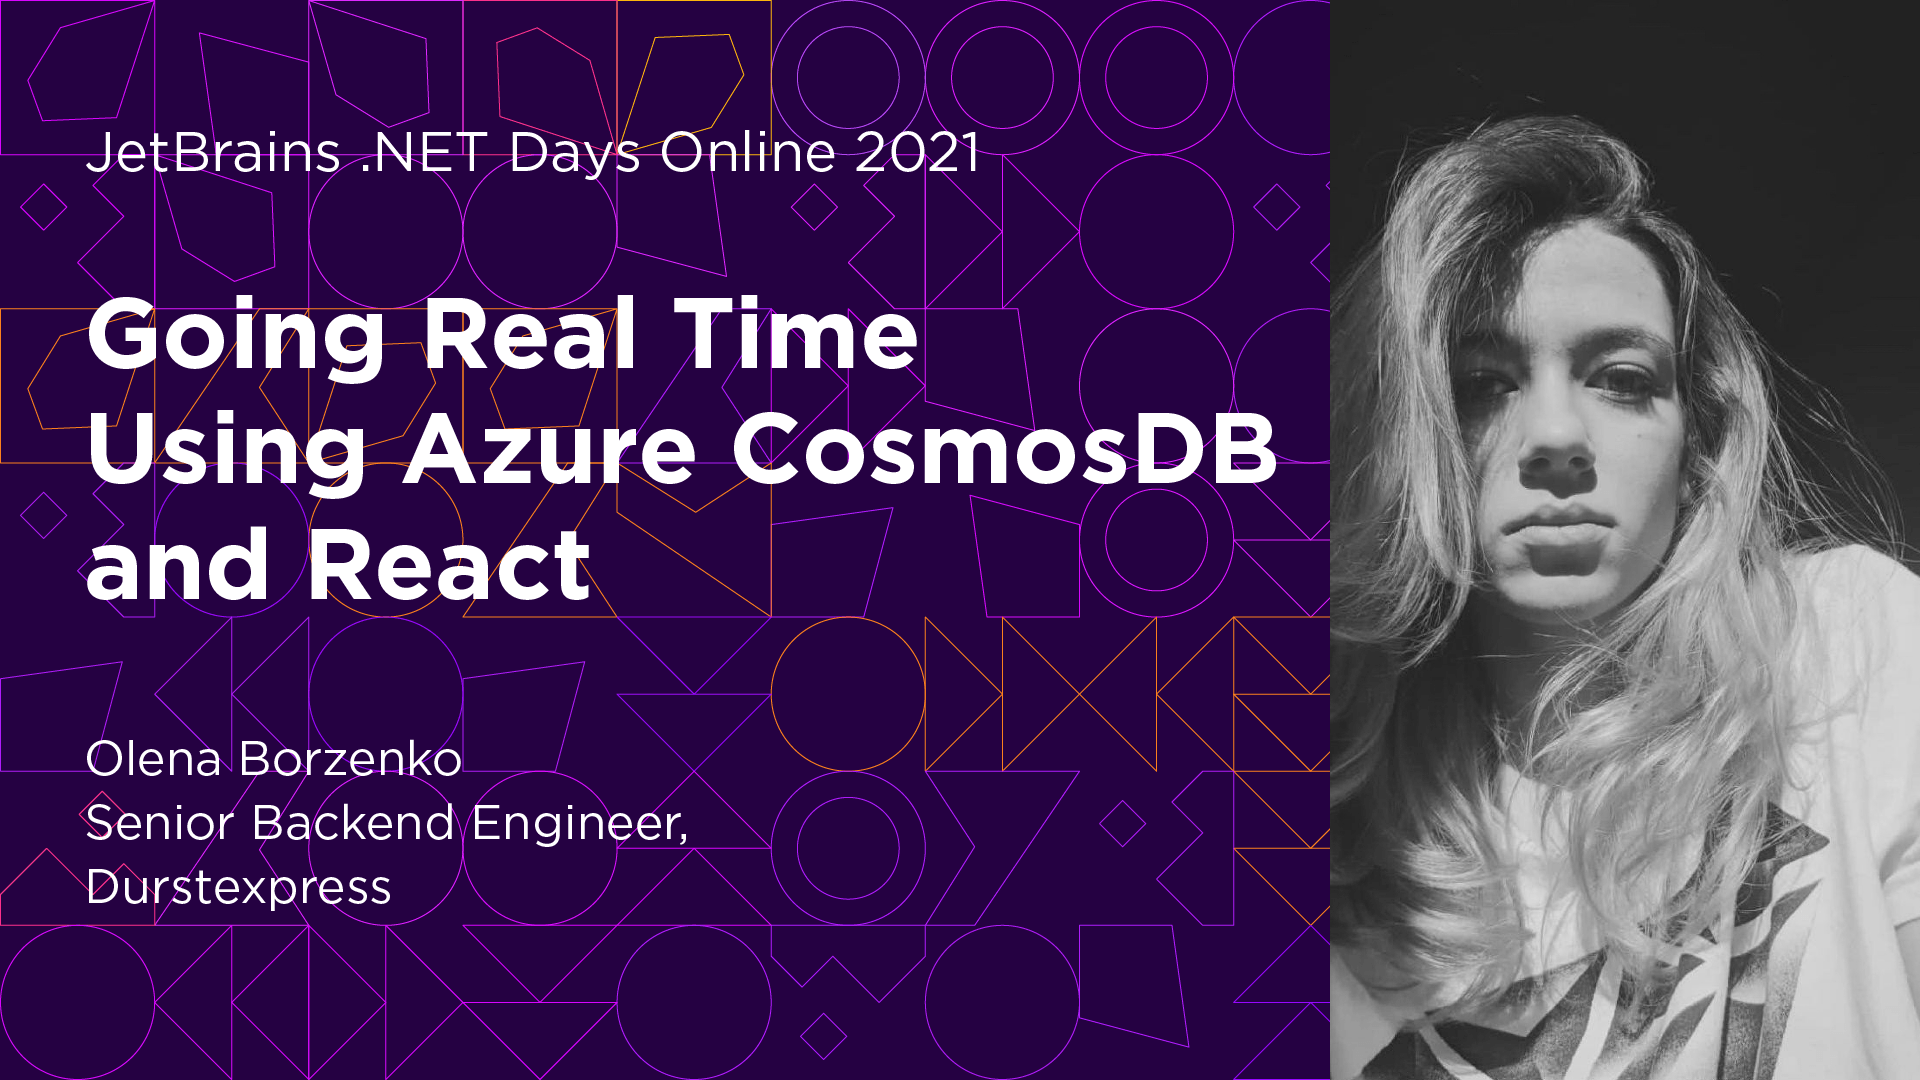 Going Real Time Using Azure CosmosDB and React